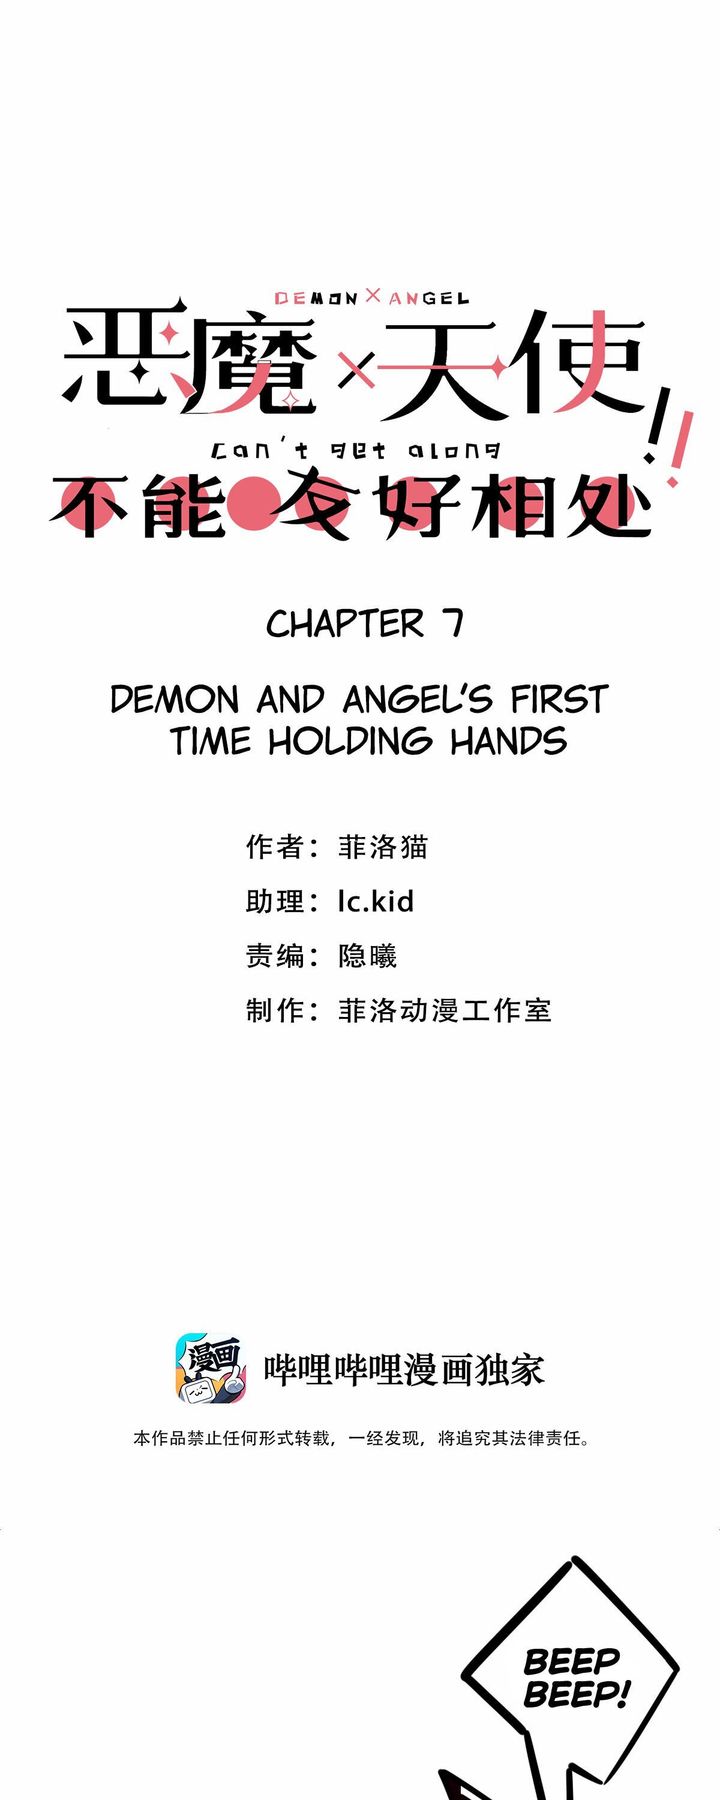 Demon X Angel Cant Get Along 29 1